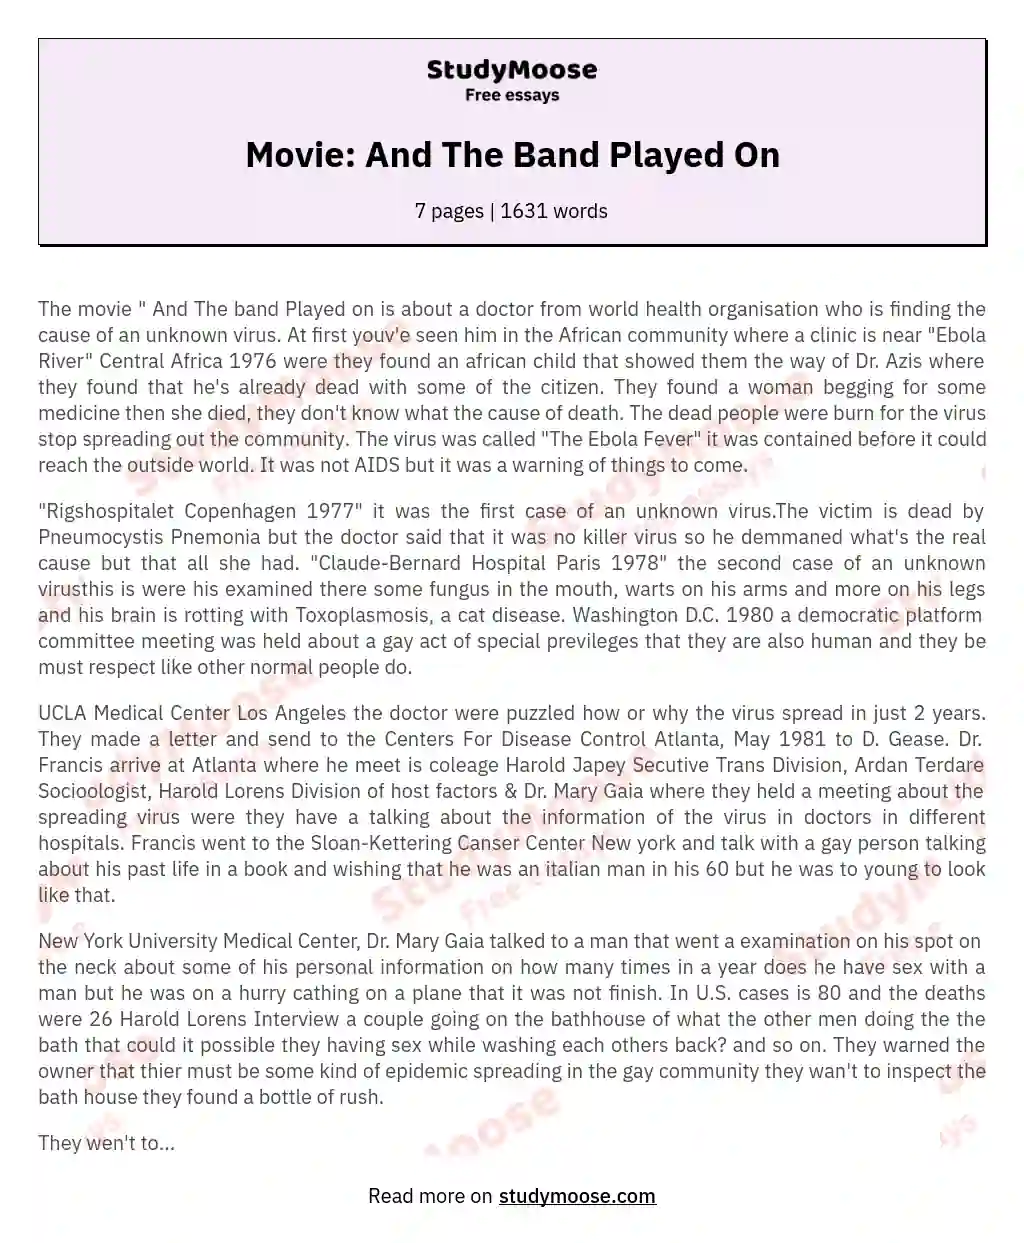 Movie: And The Band Played On essay